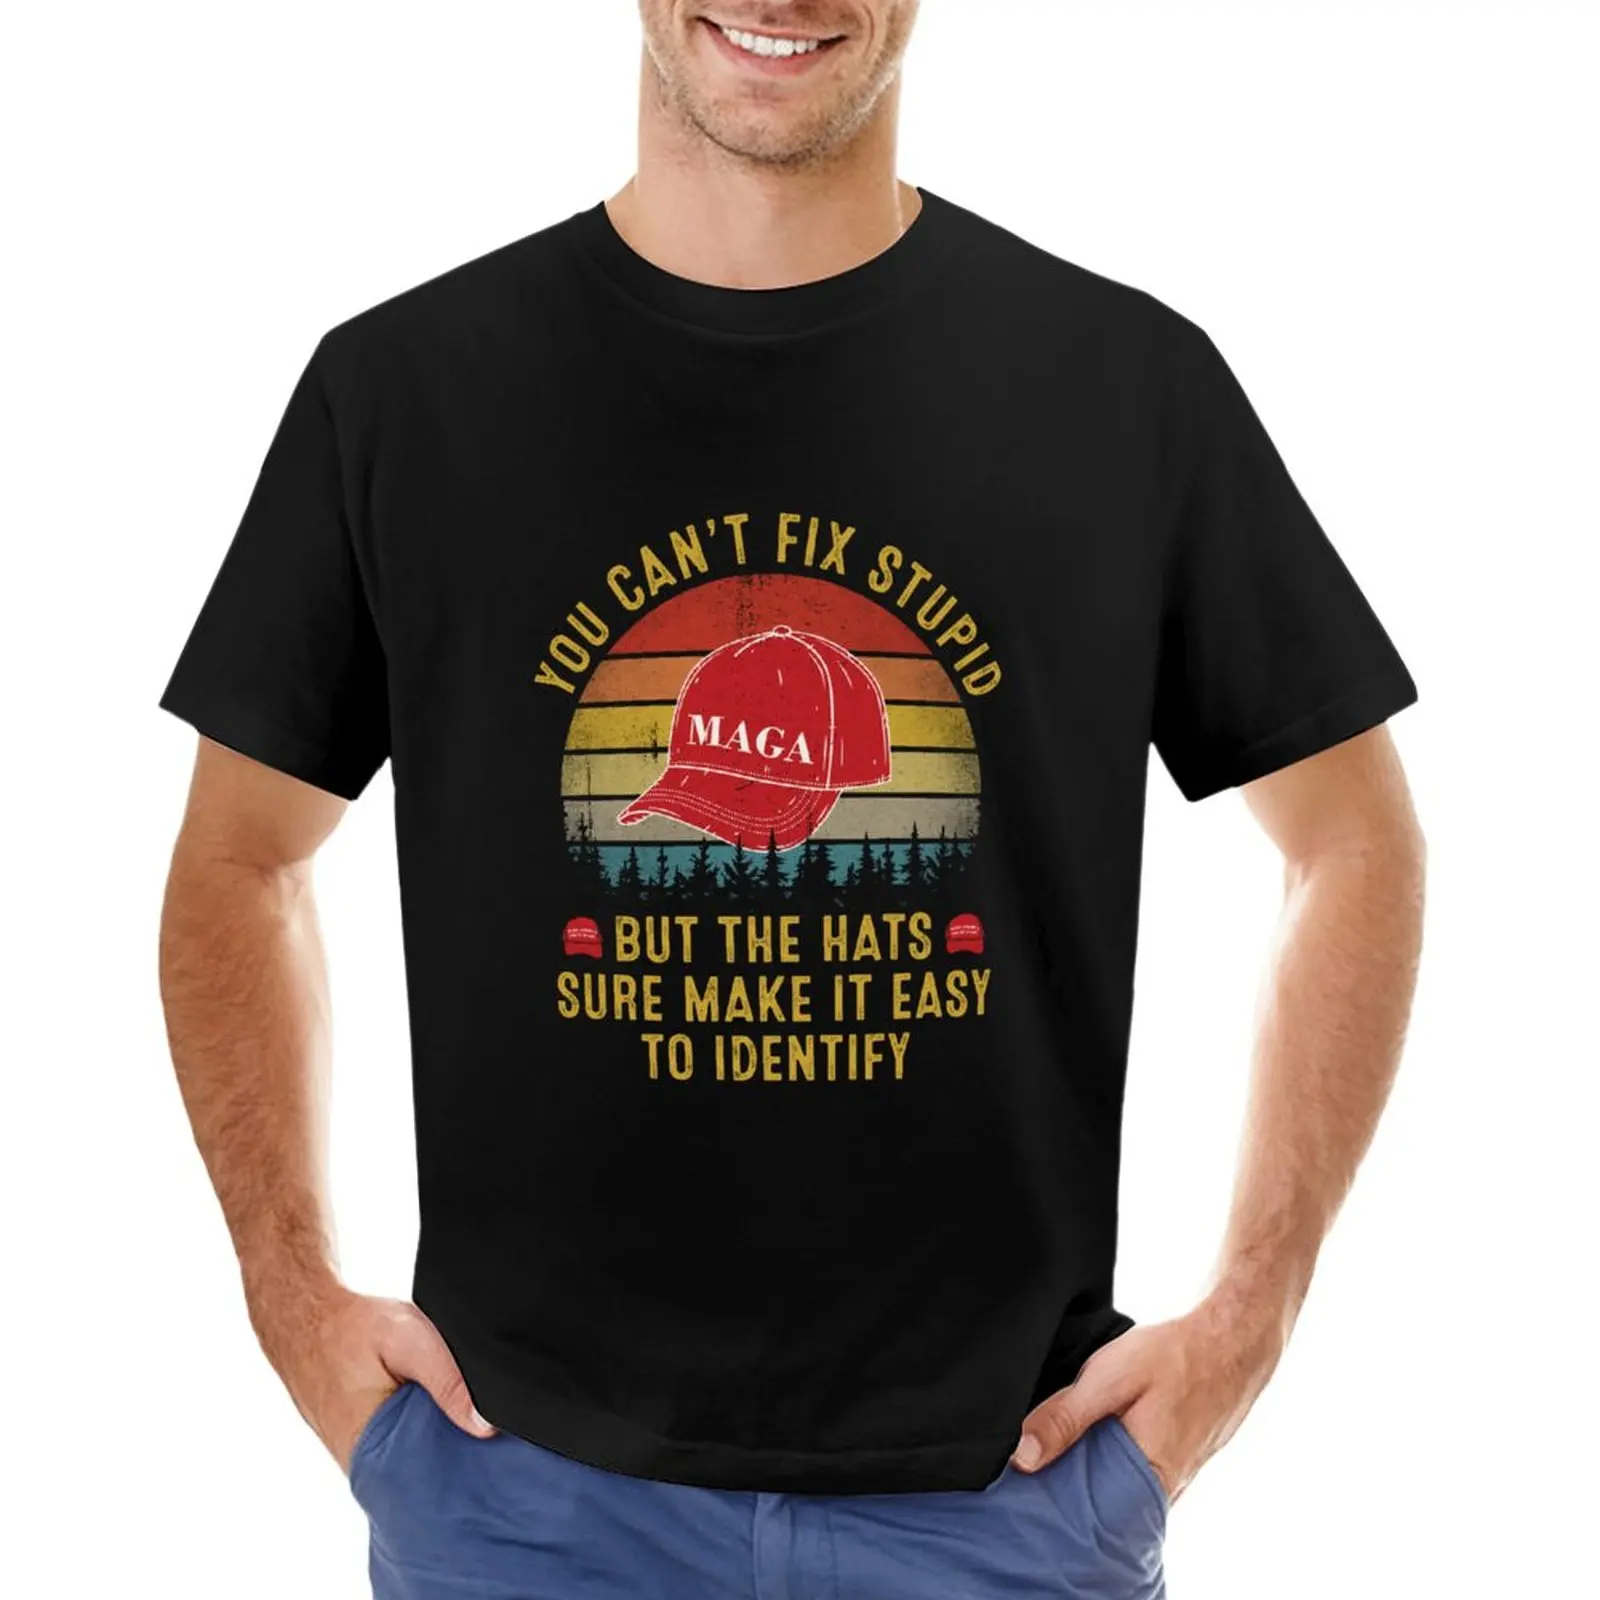 

You Can't Fix Stupid But The Hats Sure Make It Easy To Identify T-Shirt Aesthetic clothing plain white t shirts men